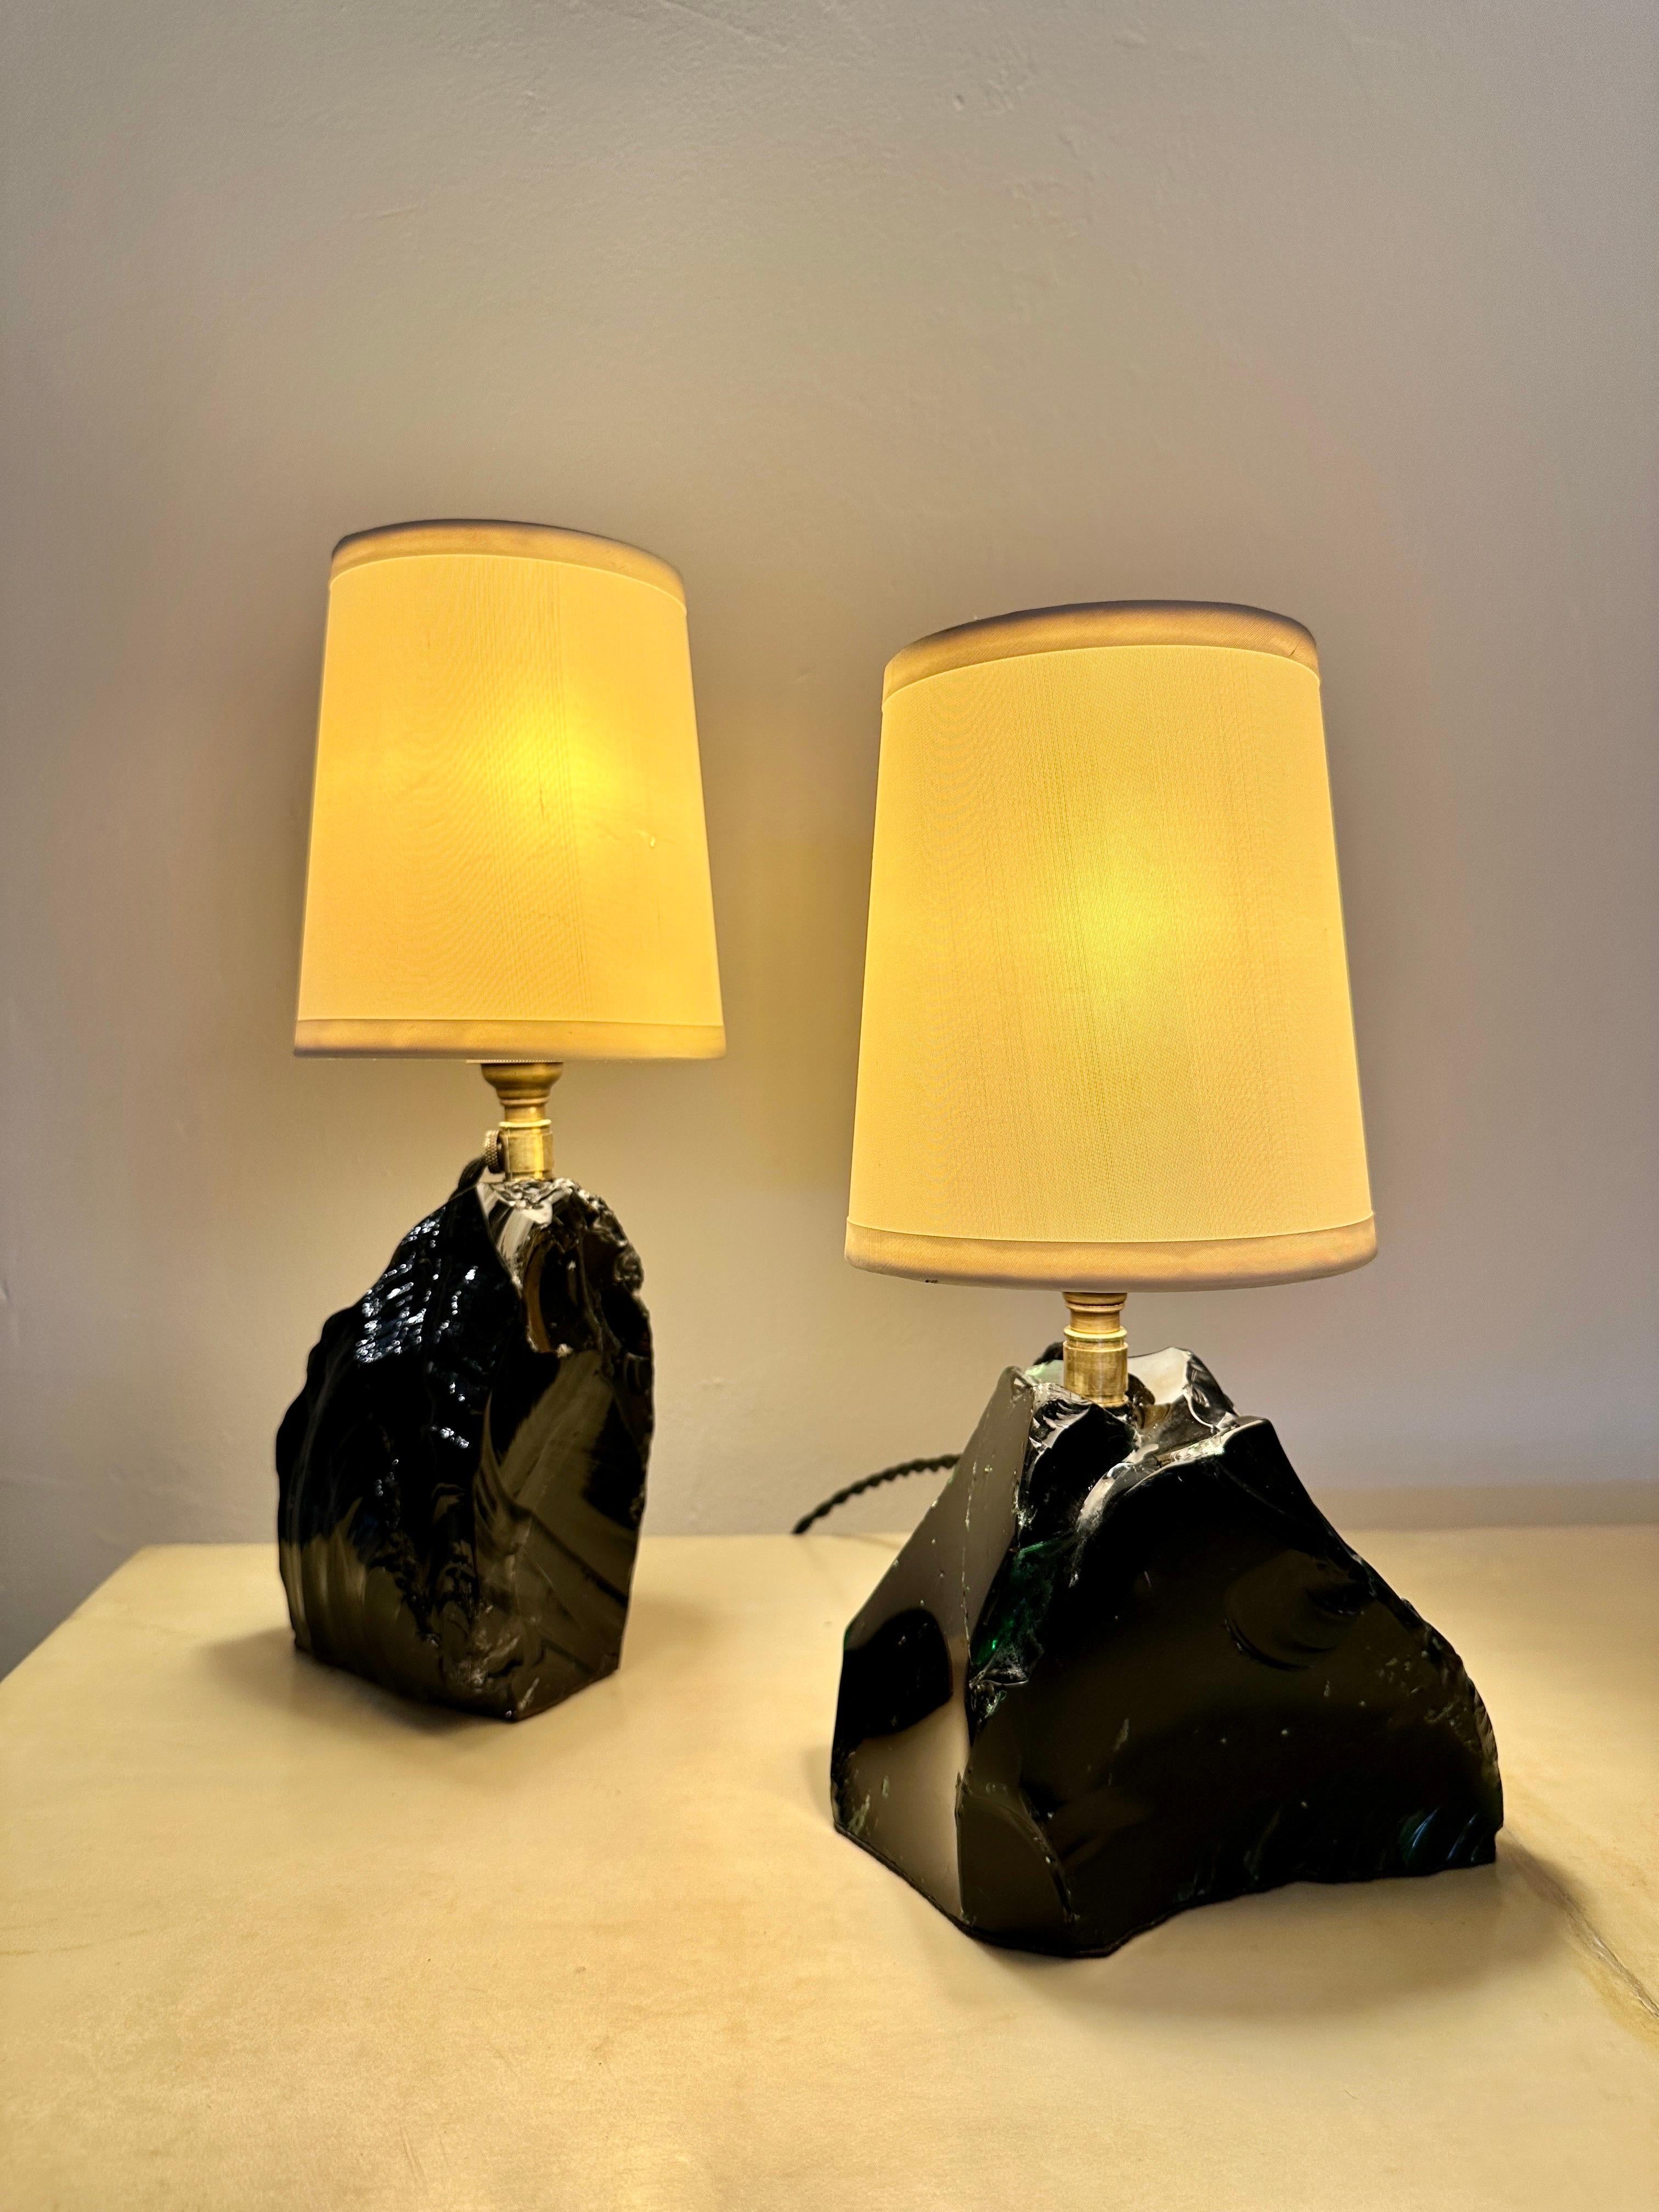 This wonderful Obsidian glass chunk has hints of deep emerald green in the light but mostly comes across as black. It is a wonderful element with NEWLY silk wired cable and plug. A fantastic lamp for any décor in the manner of JMF and designed